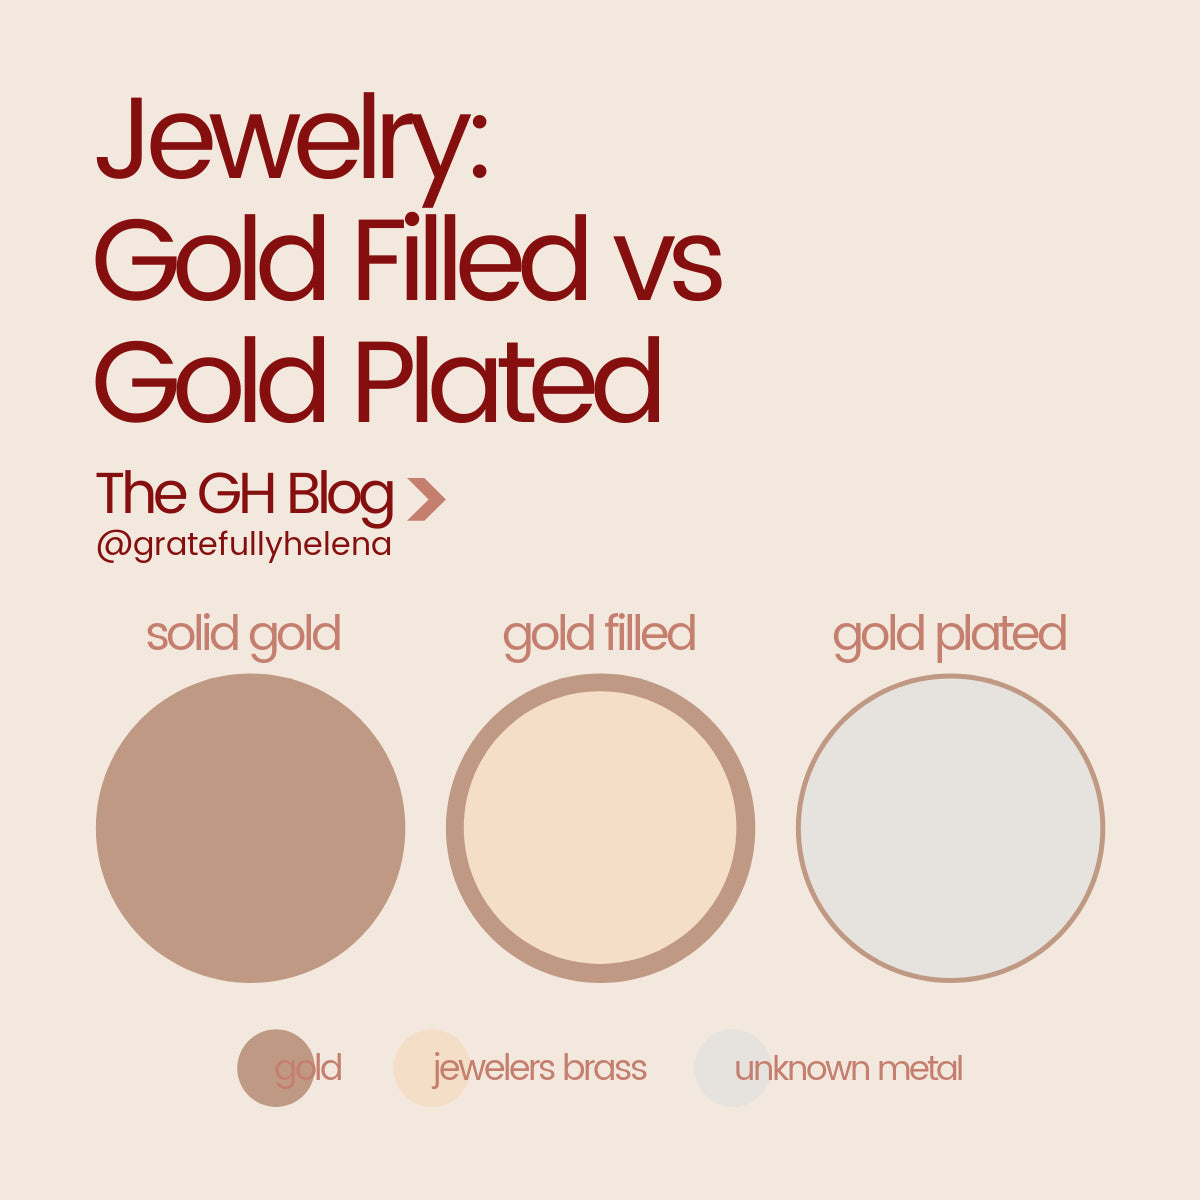 Gold Filled vs Gold Plated Jewelry